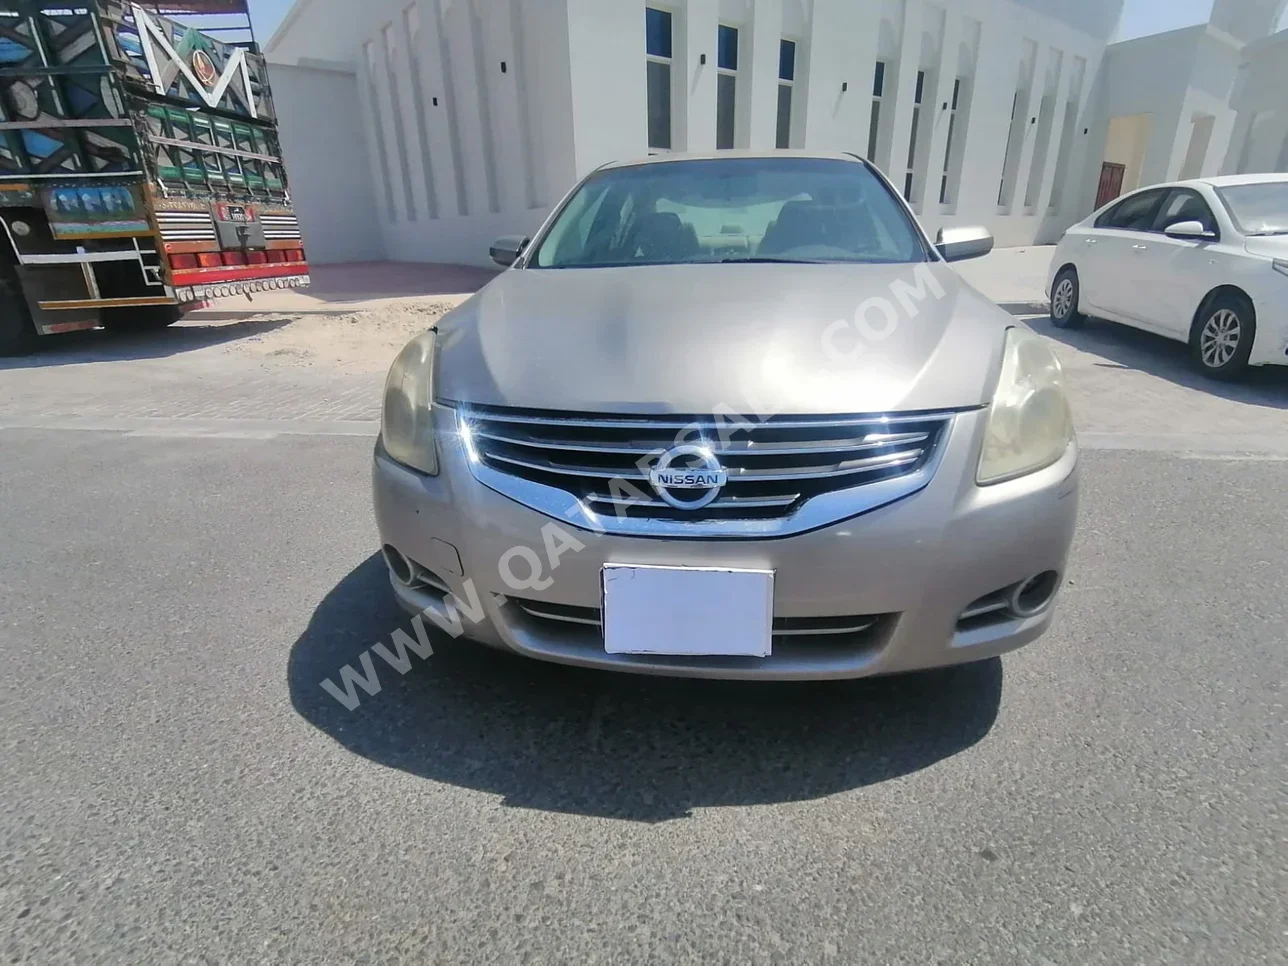 Nissan  Altima  2012  Automatic  273,000 Km  4 Cylinder  Front Wheel Drive (FWD)  Sedan  Silver